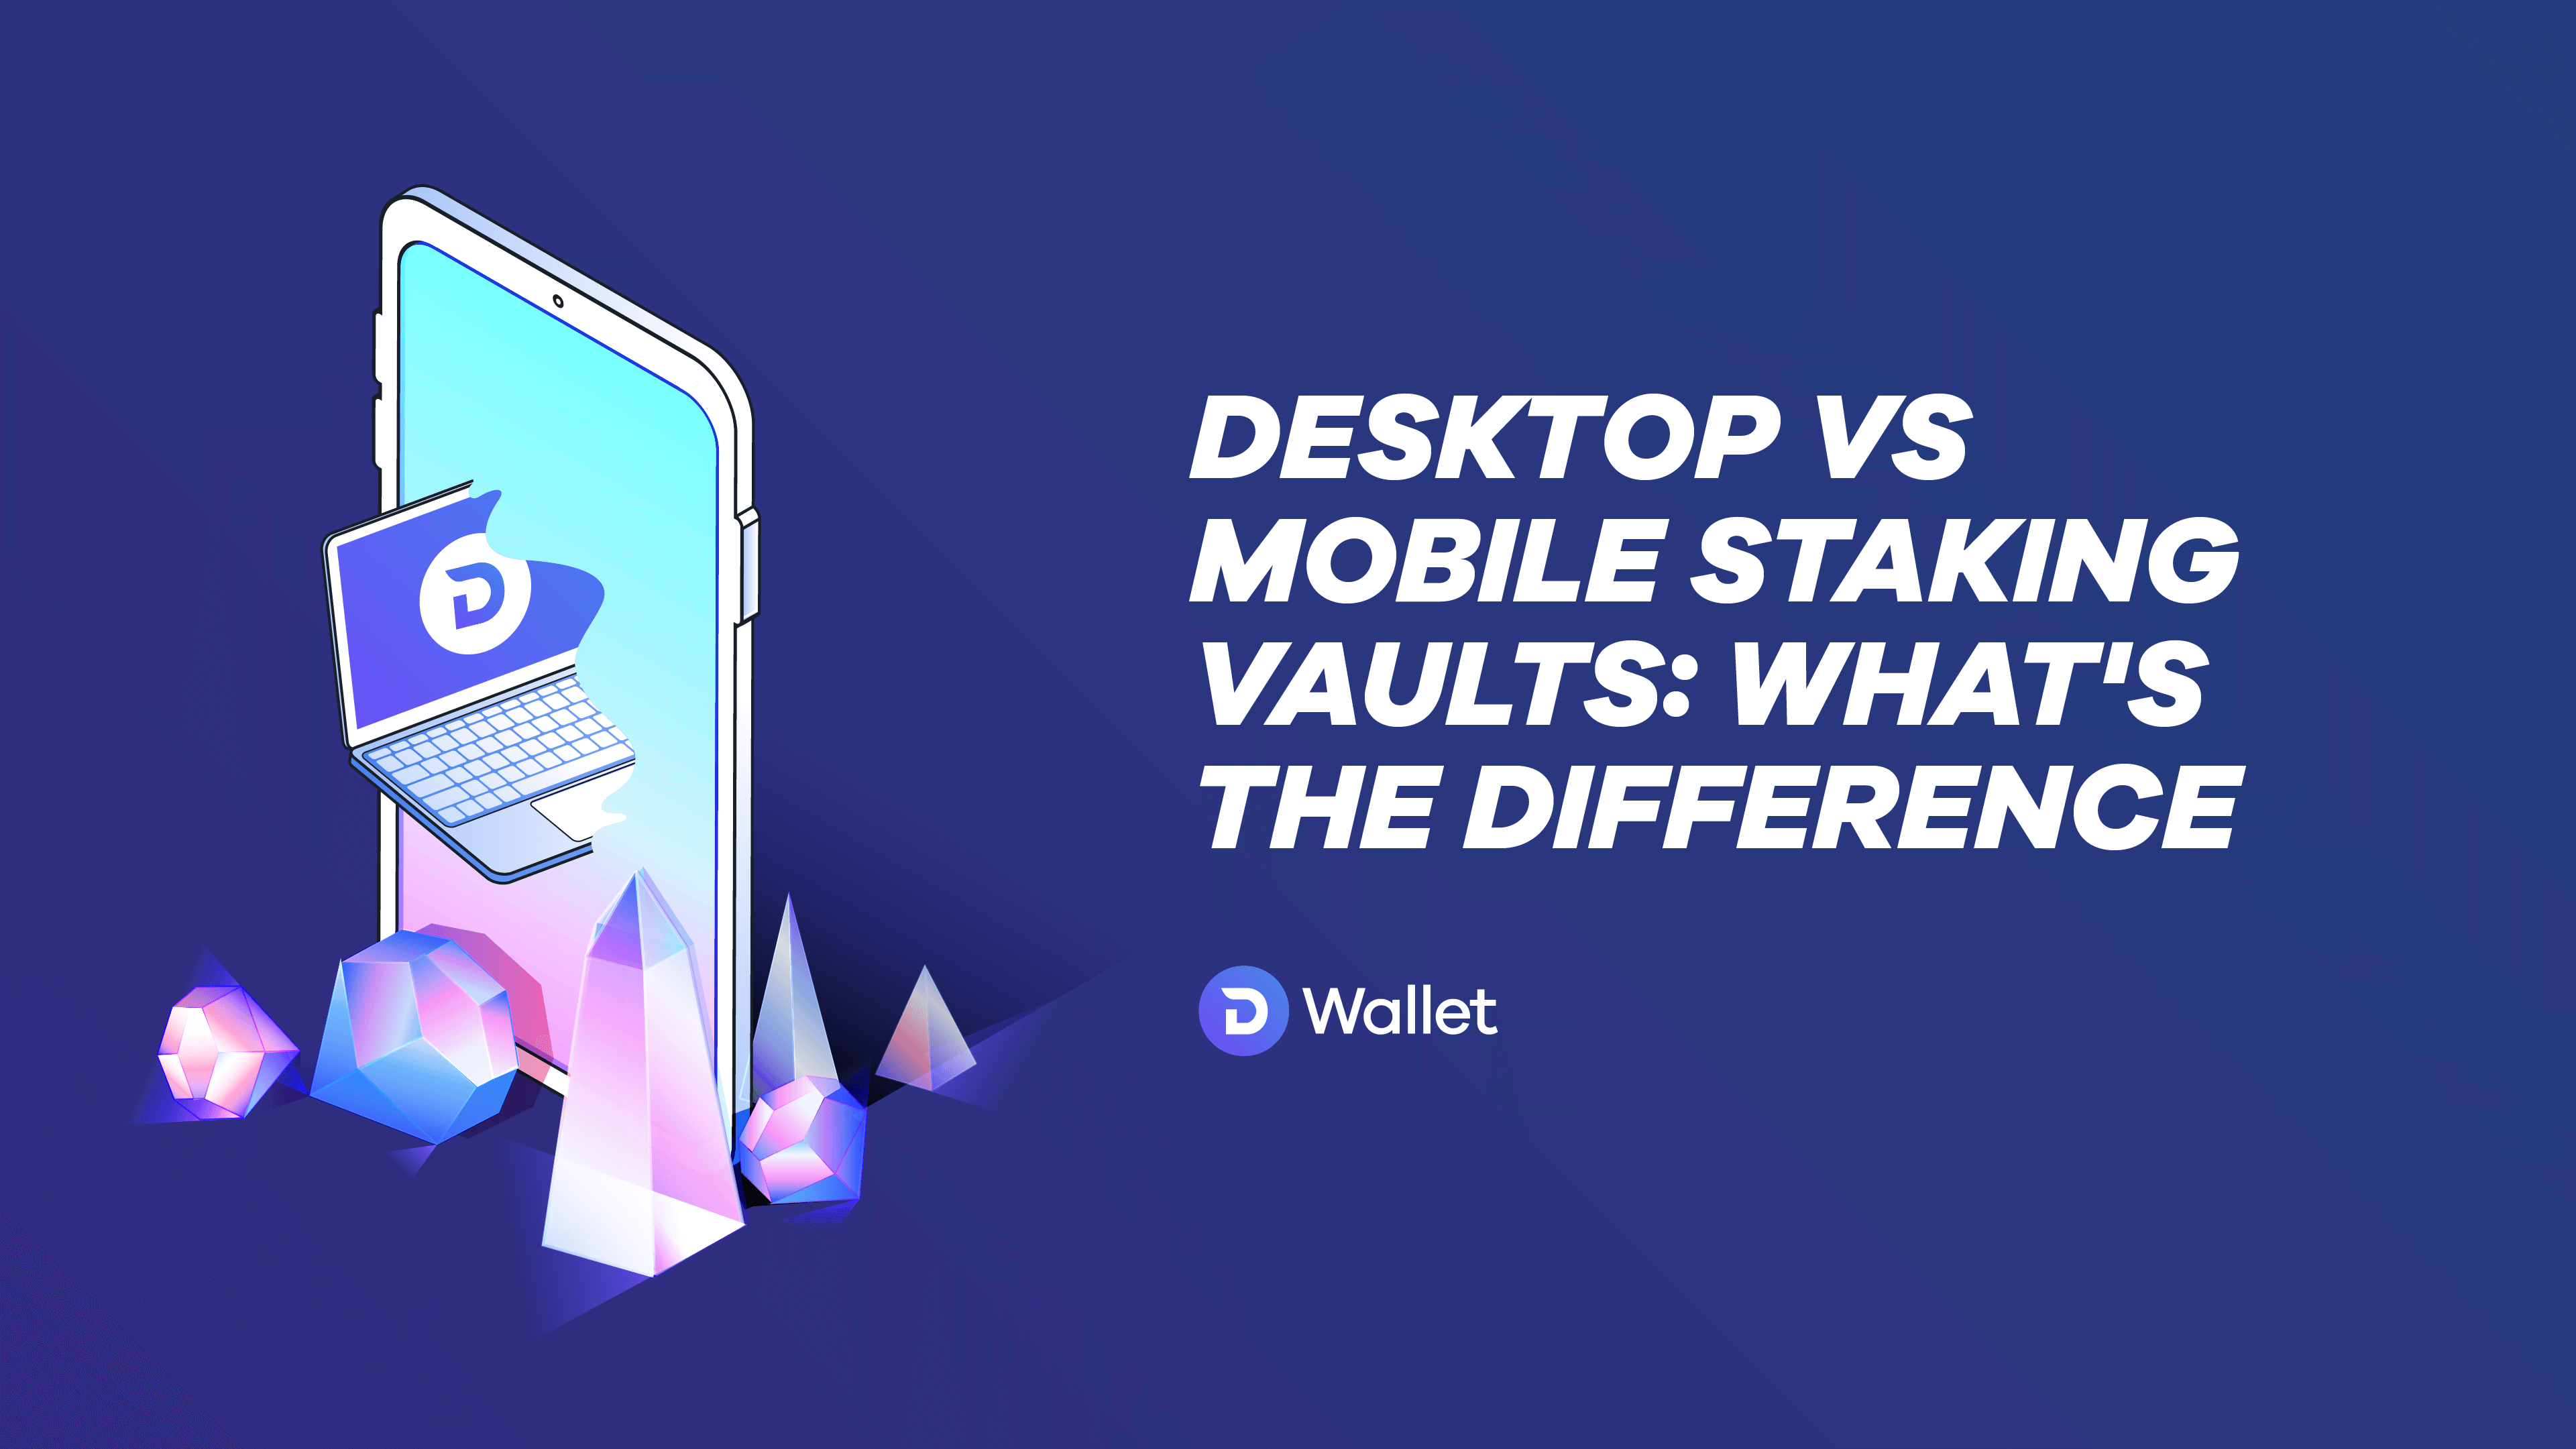 Desktop vs Mobile Staking: What's the difference?